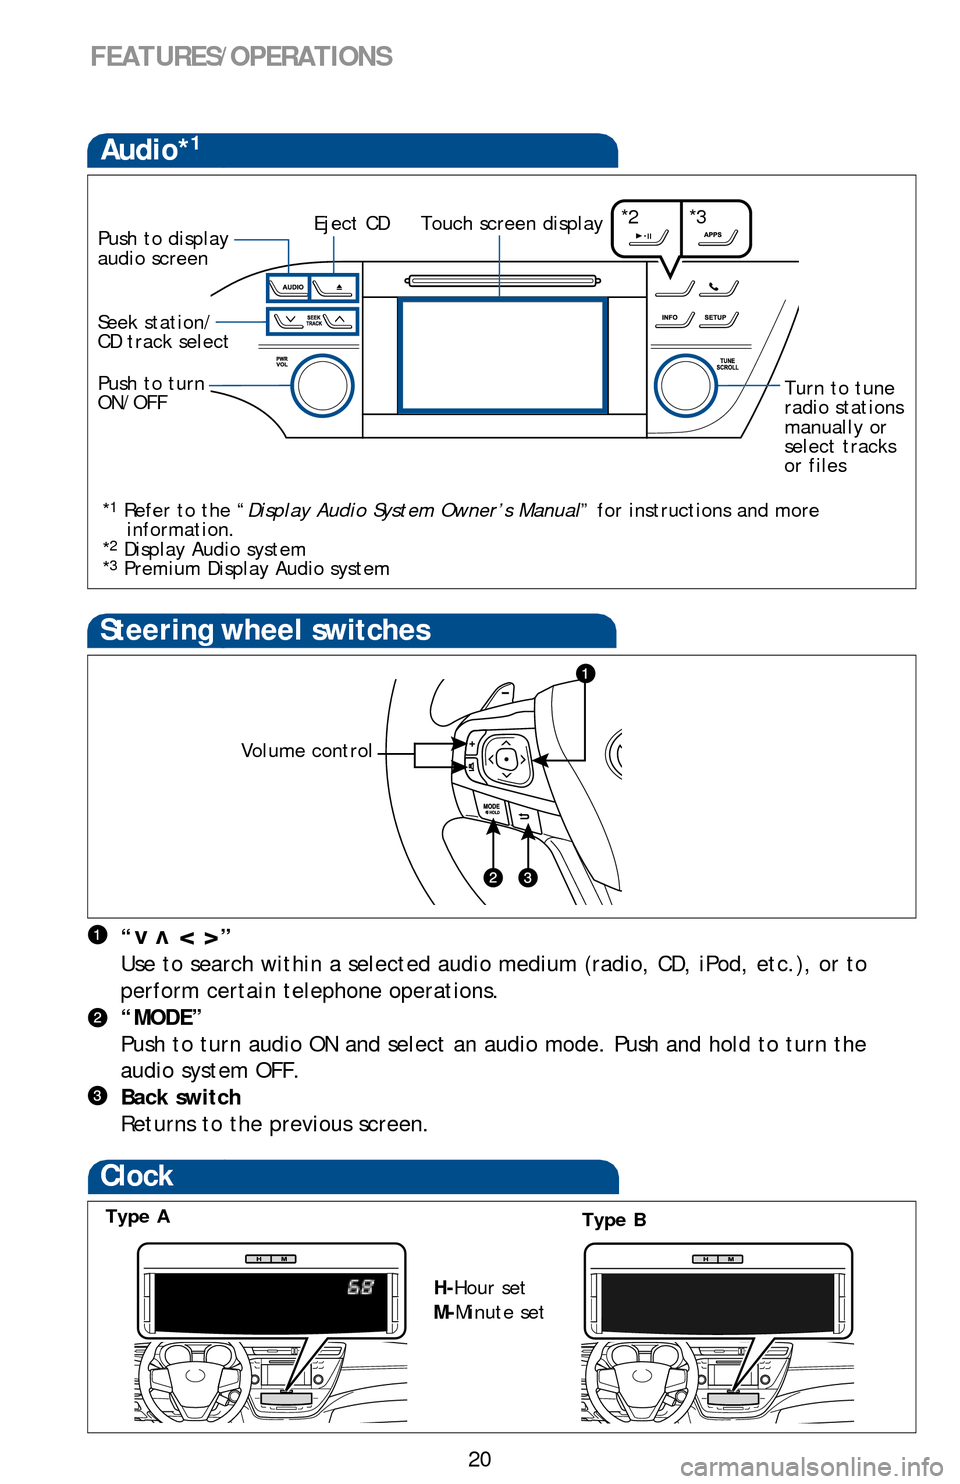 TOYOTA AVALON 2013 XX40 / 4.G Quick Reference Guide 20
Steering wheel switches
“            ”
Use to search within a selected audio medium (radio, CD, iPod, etc.), or to 
perform certain telephone operations.
“MODE” 
Push to turn audio ON and s